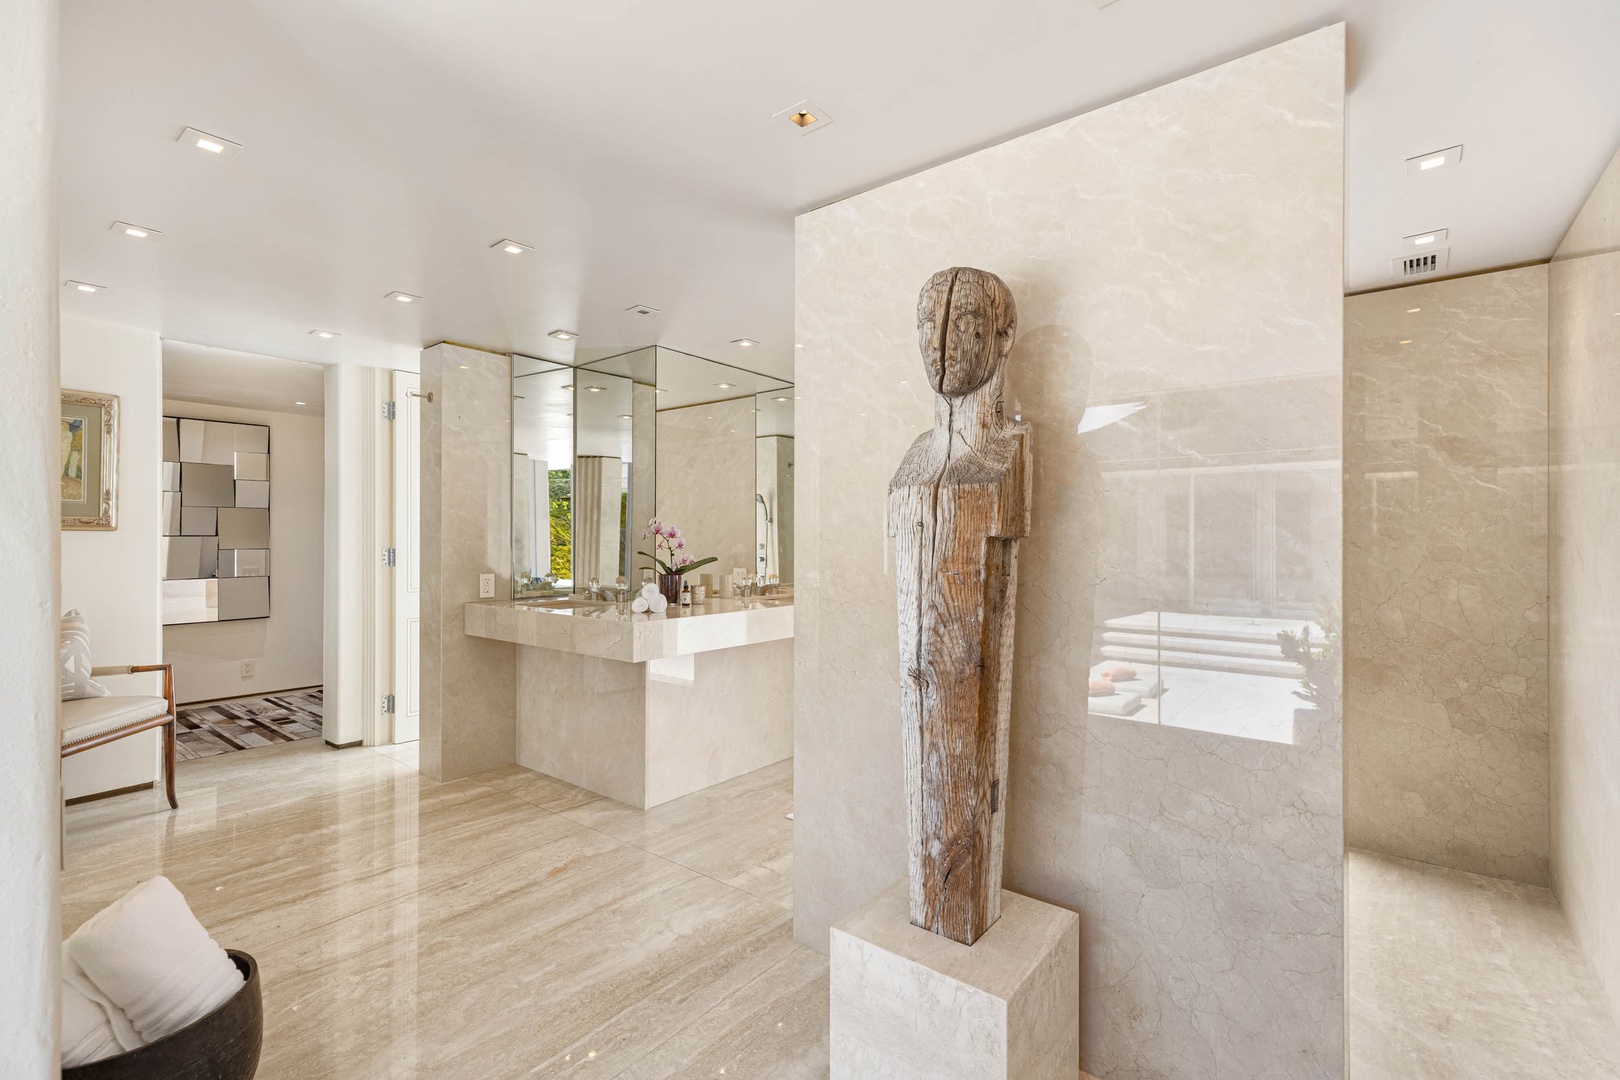 Honolulu Vacation Rentals, Sky Ridge House - The serene statue stands as a testament to elegance, set against the expansive, reflective surface of the mirrors and the sophisticated textures of the bathroom.